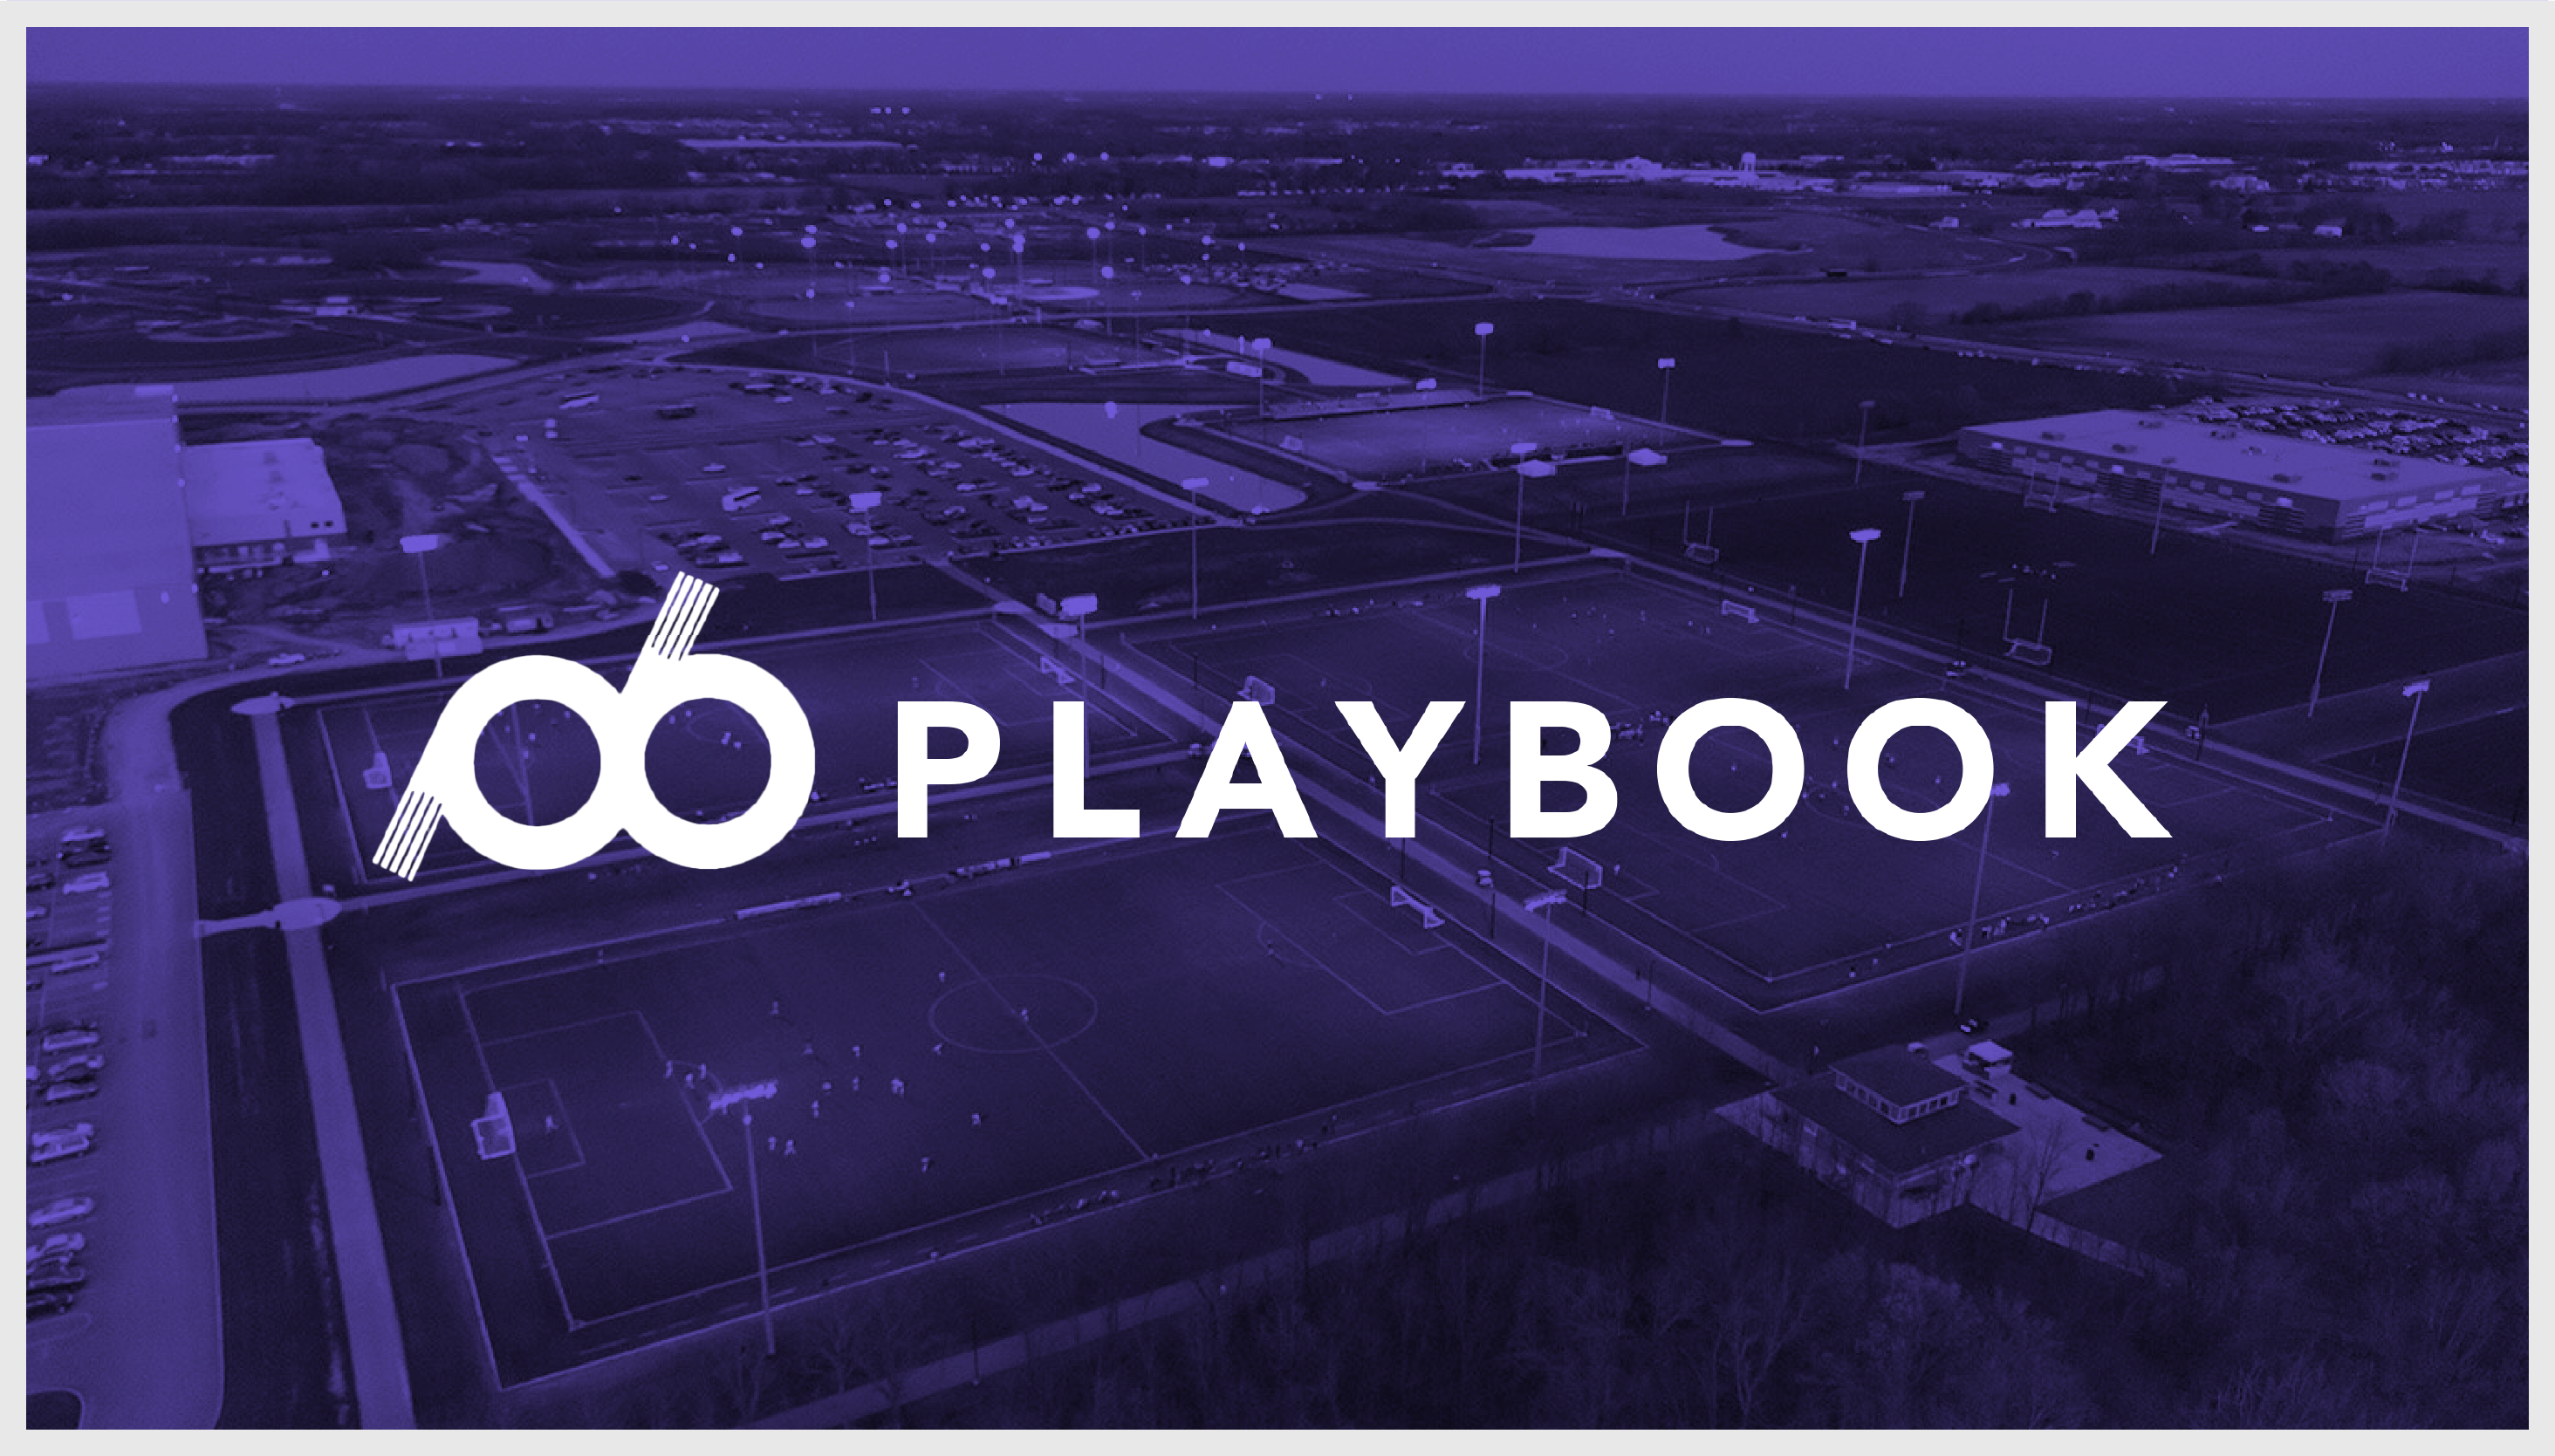 Playbook logo overlapping a photograph of a sports field